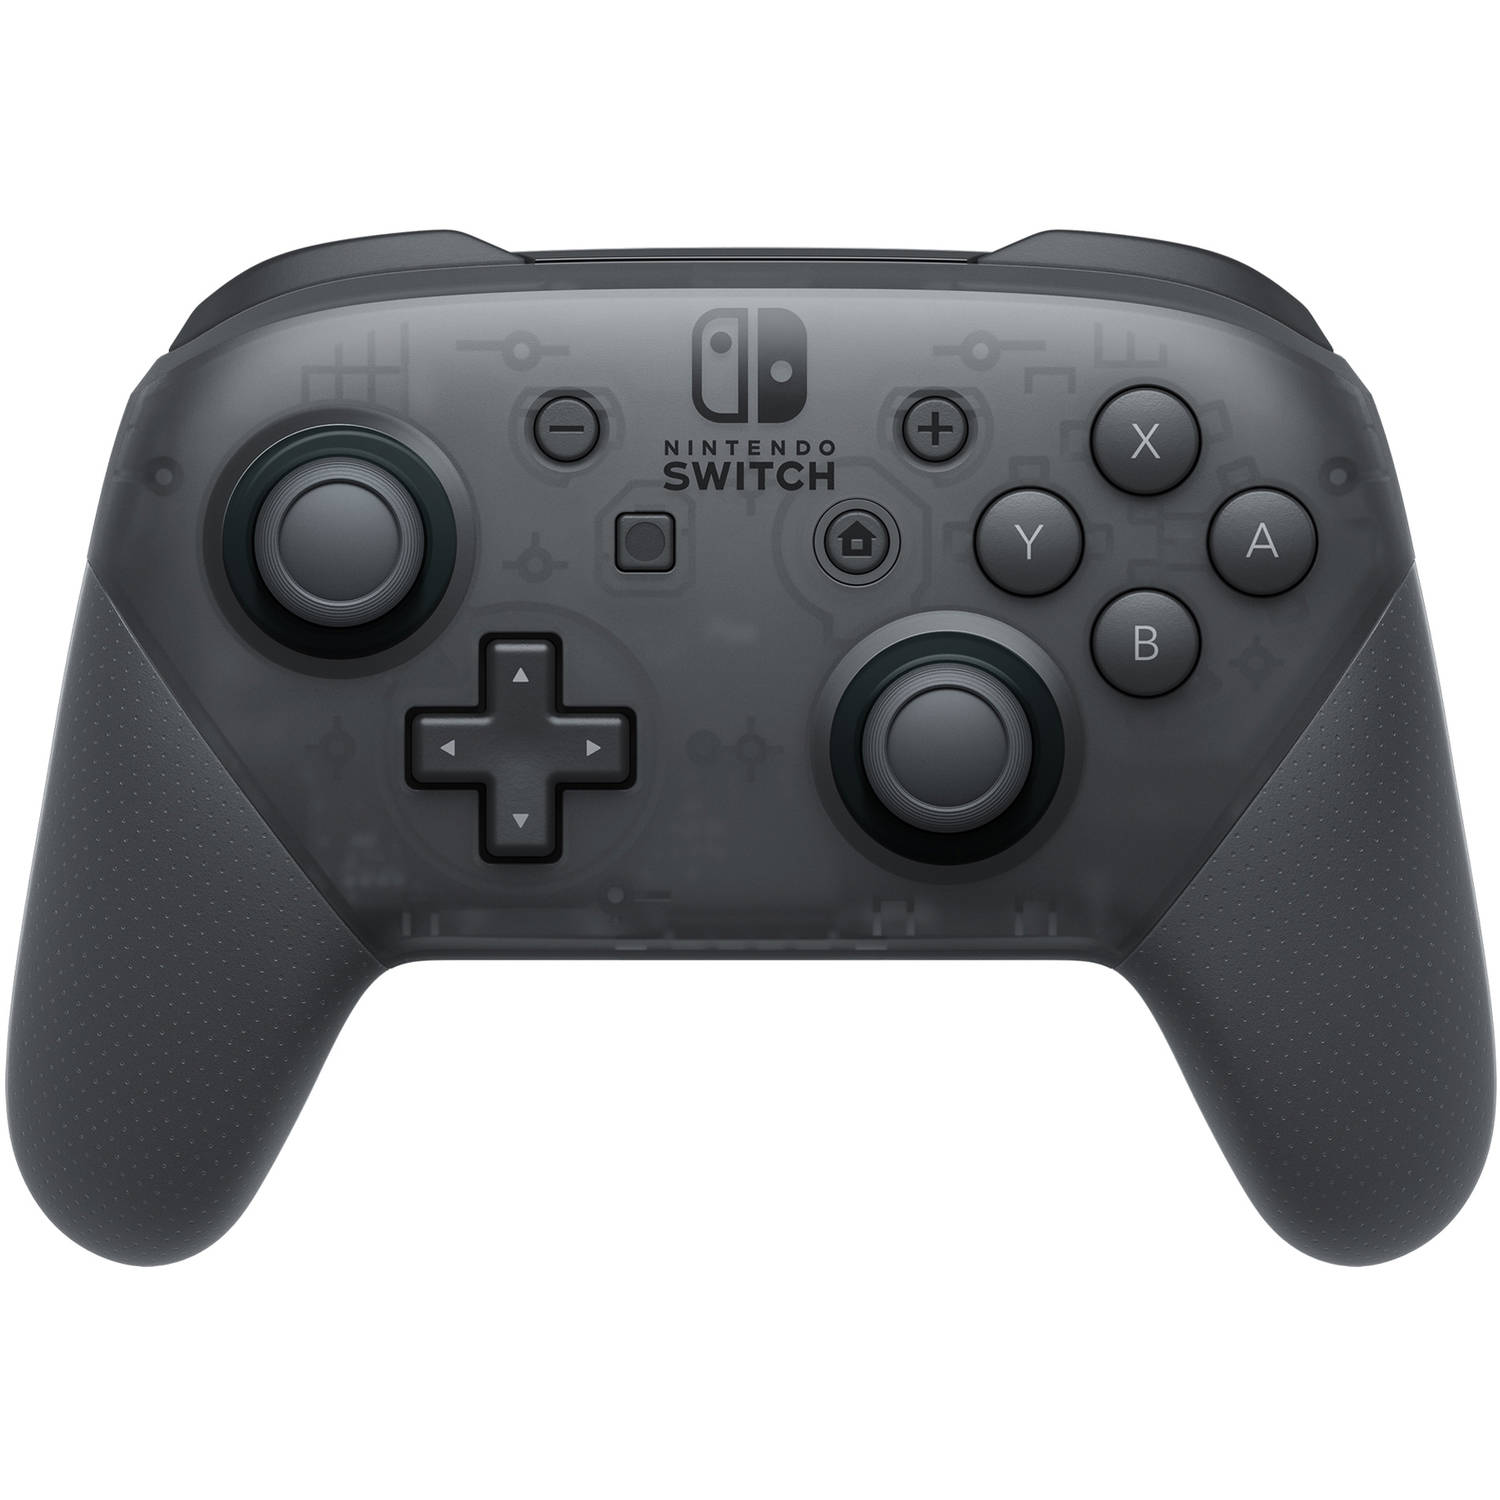 Nintendo Switch Pro Controller (Black), $50 (online) or $40 (in-store pickup/YMMV) at Walmart